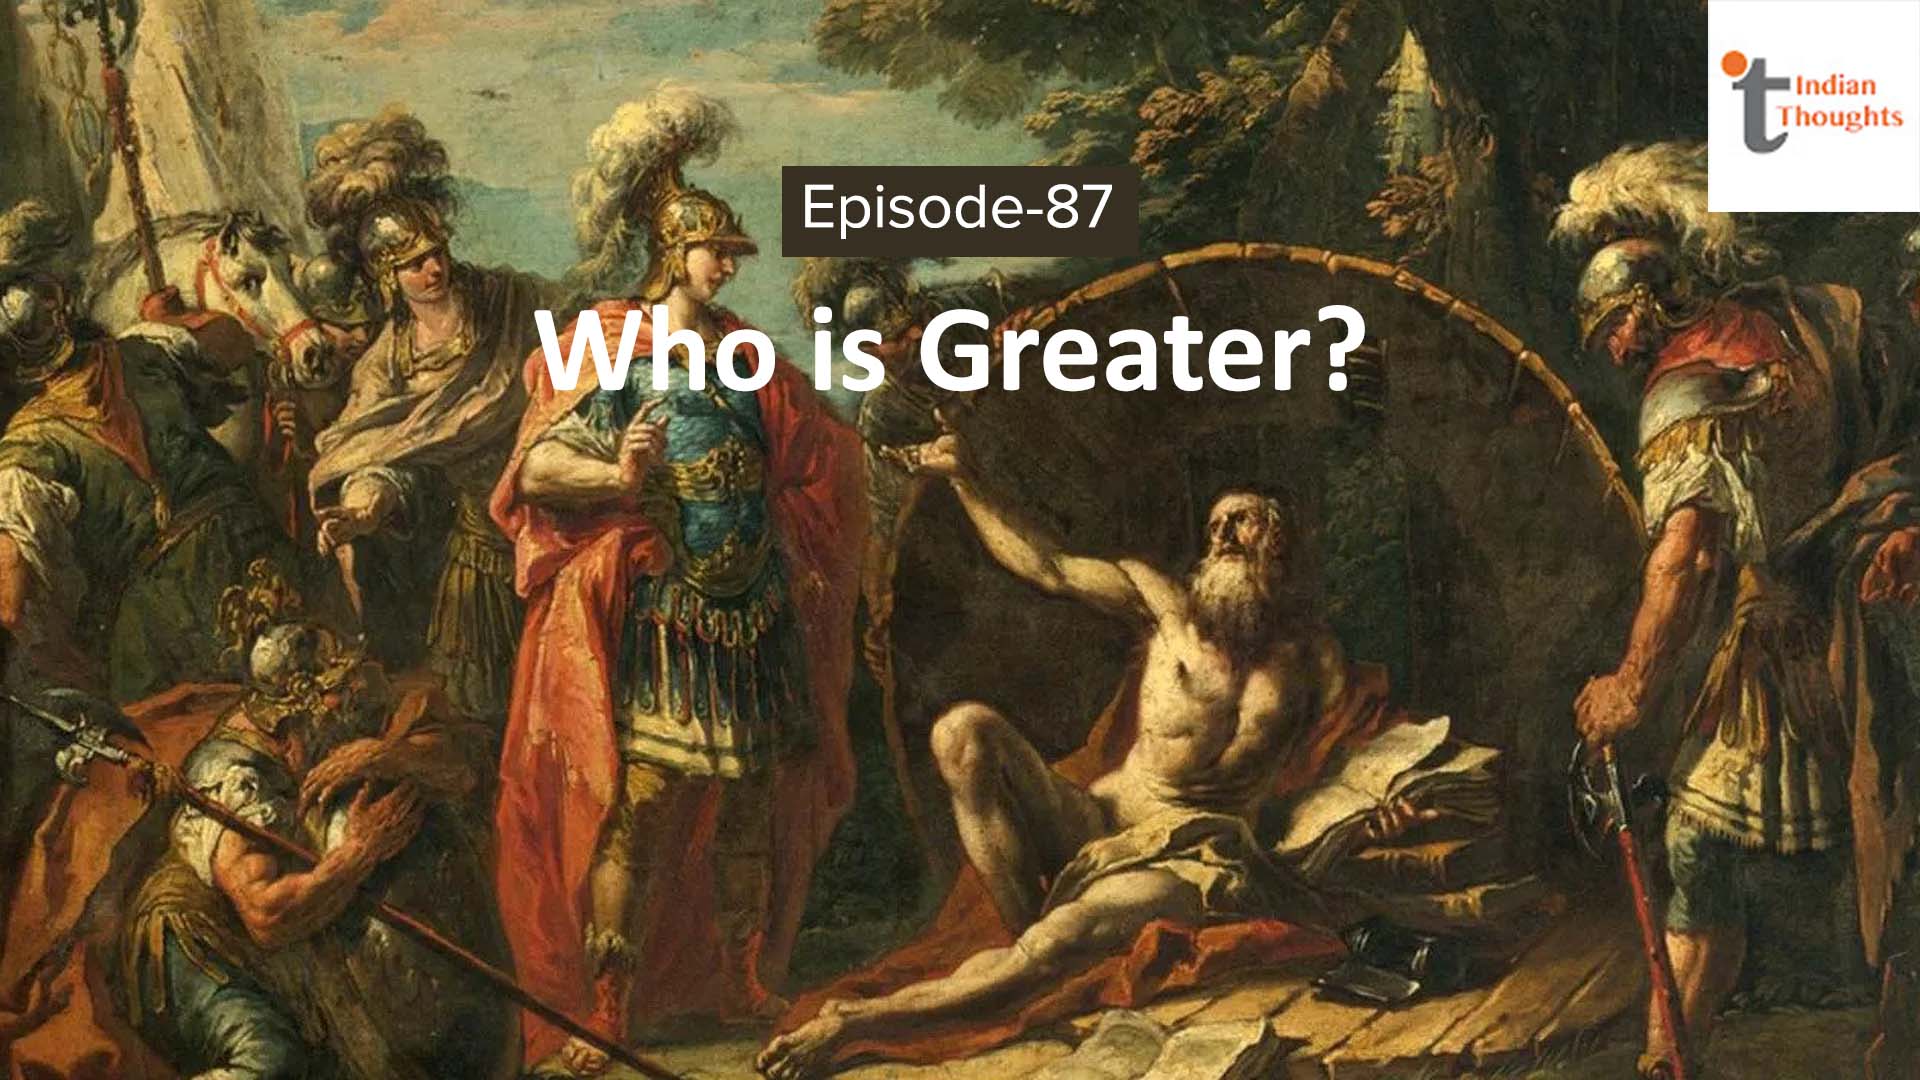 Who is greater?